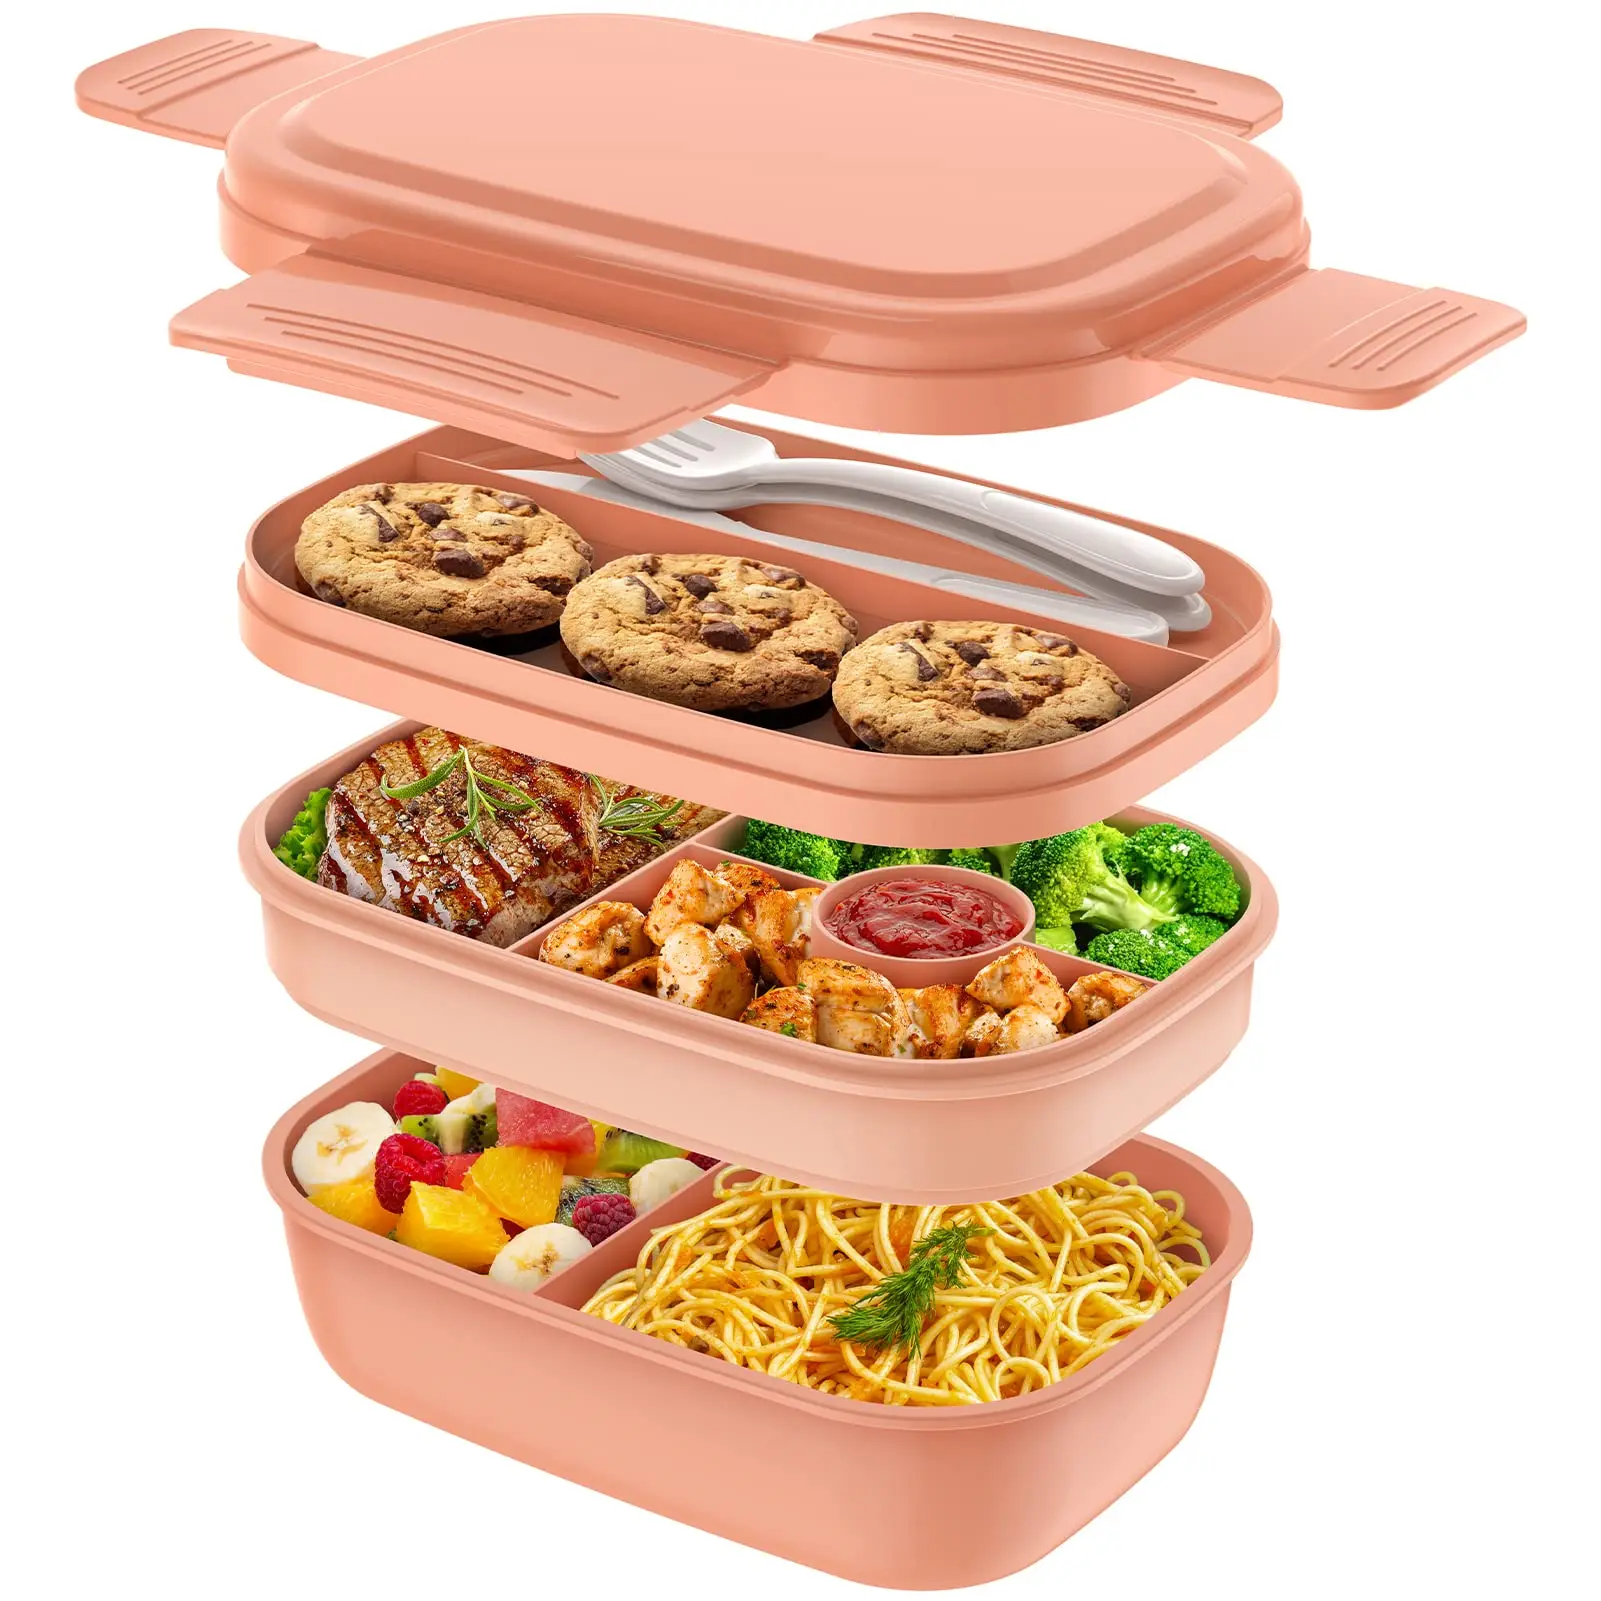 

Bento Box Adult Lunch Box,3 Stackable Bento Lunch Containers for Adults, Utensil Set, Leak-Proof Lunchbox Bento Box for Dining